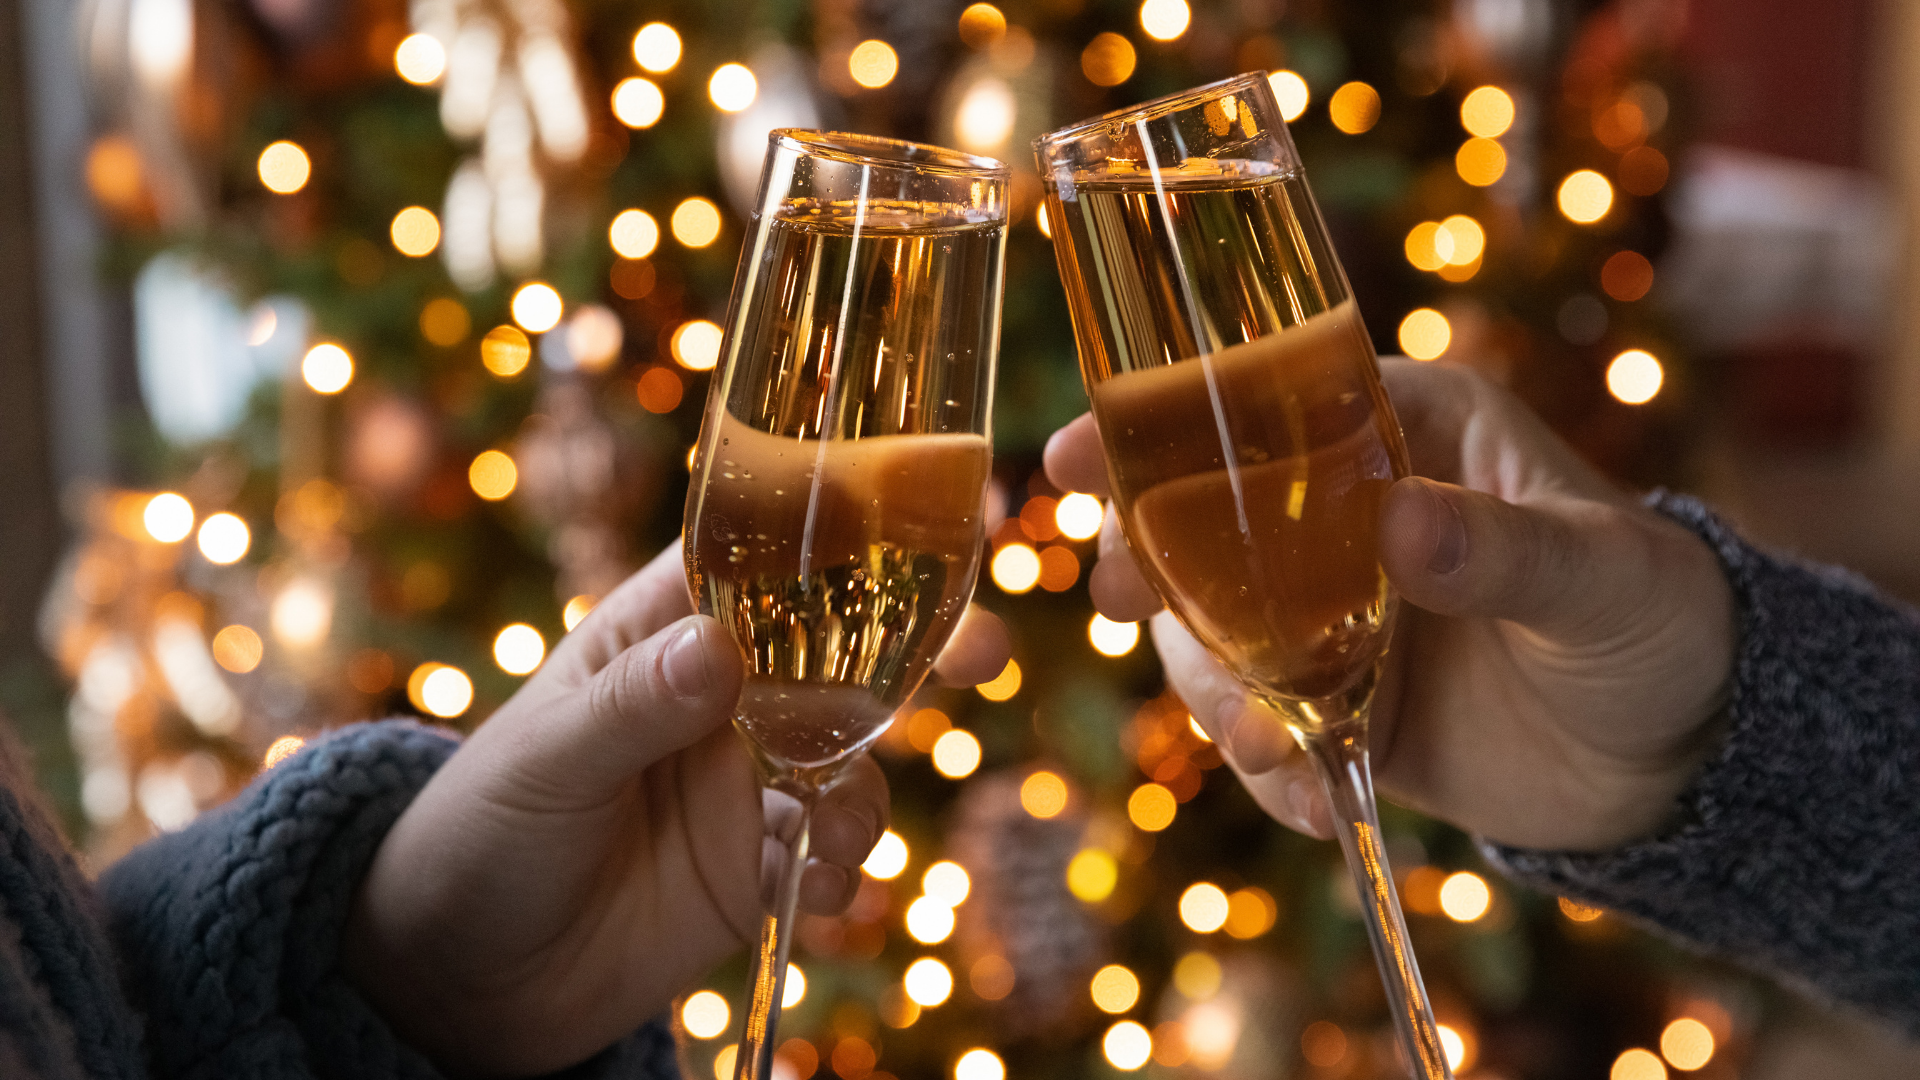 FIVE ALTERNATIVE WAYS TO SPEND NEW YEARS EVE